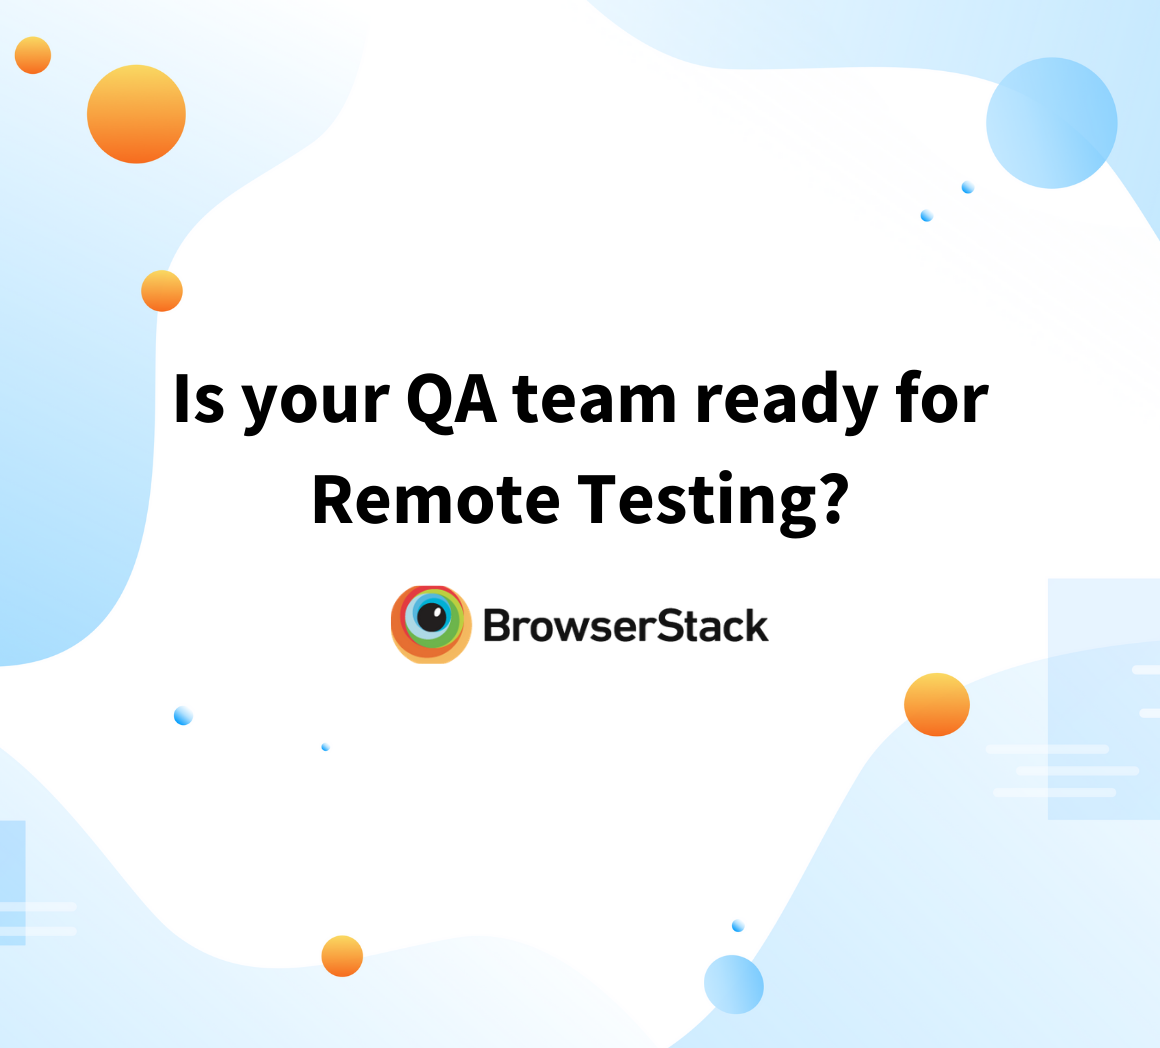 Standards for remote QA testing